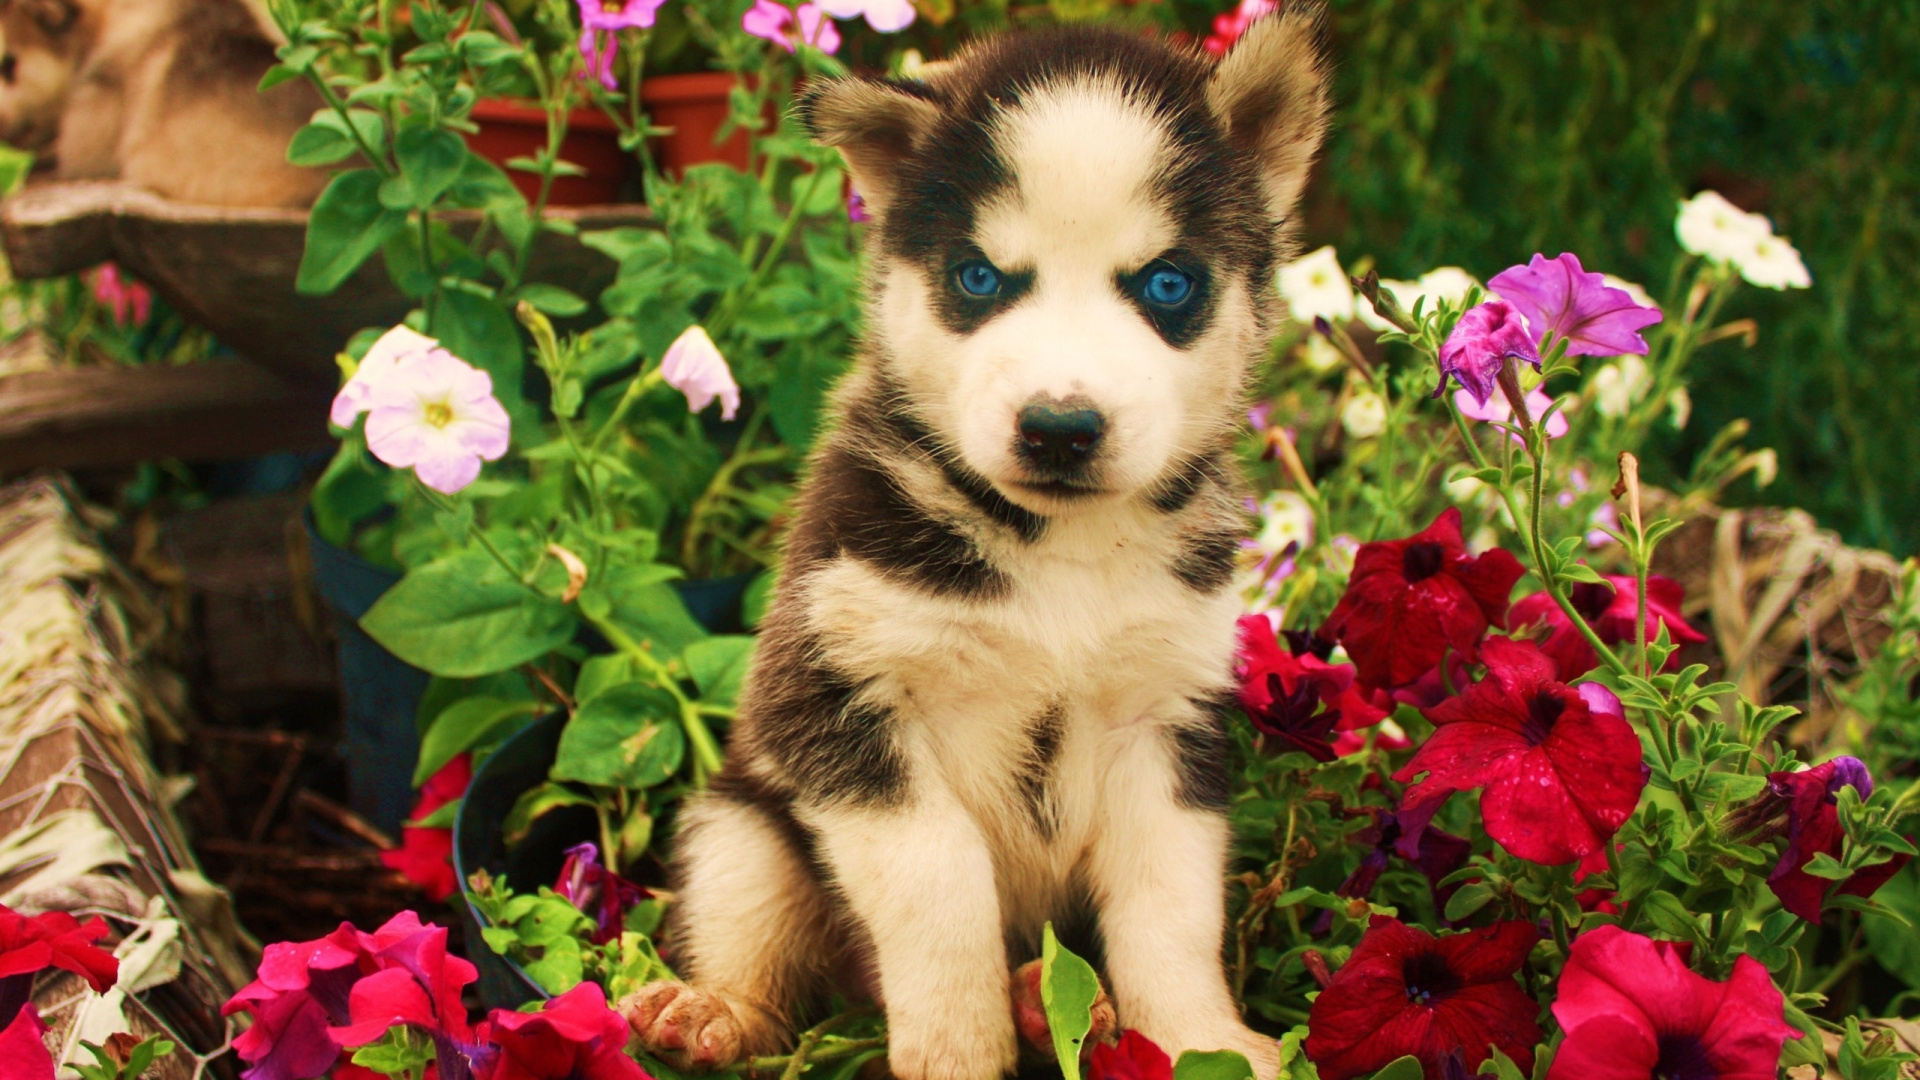 Black and White Siberian Husky Puppy Surrounded by Red Flowers. Wallpaper in 1920x1080 Resolution